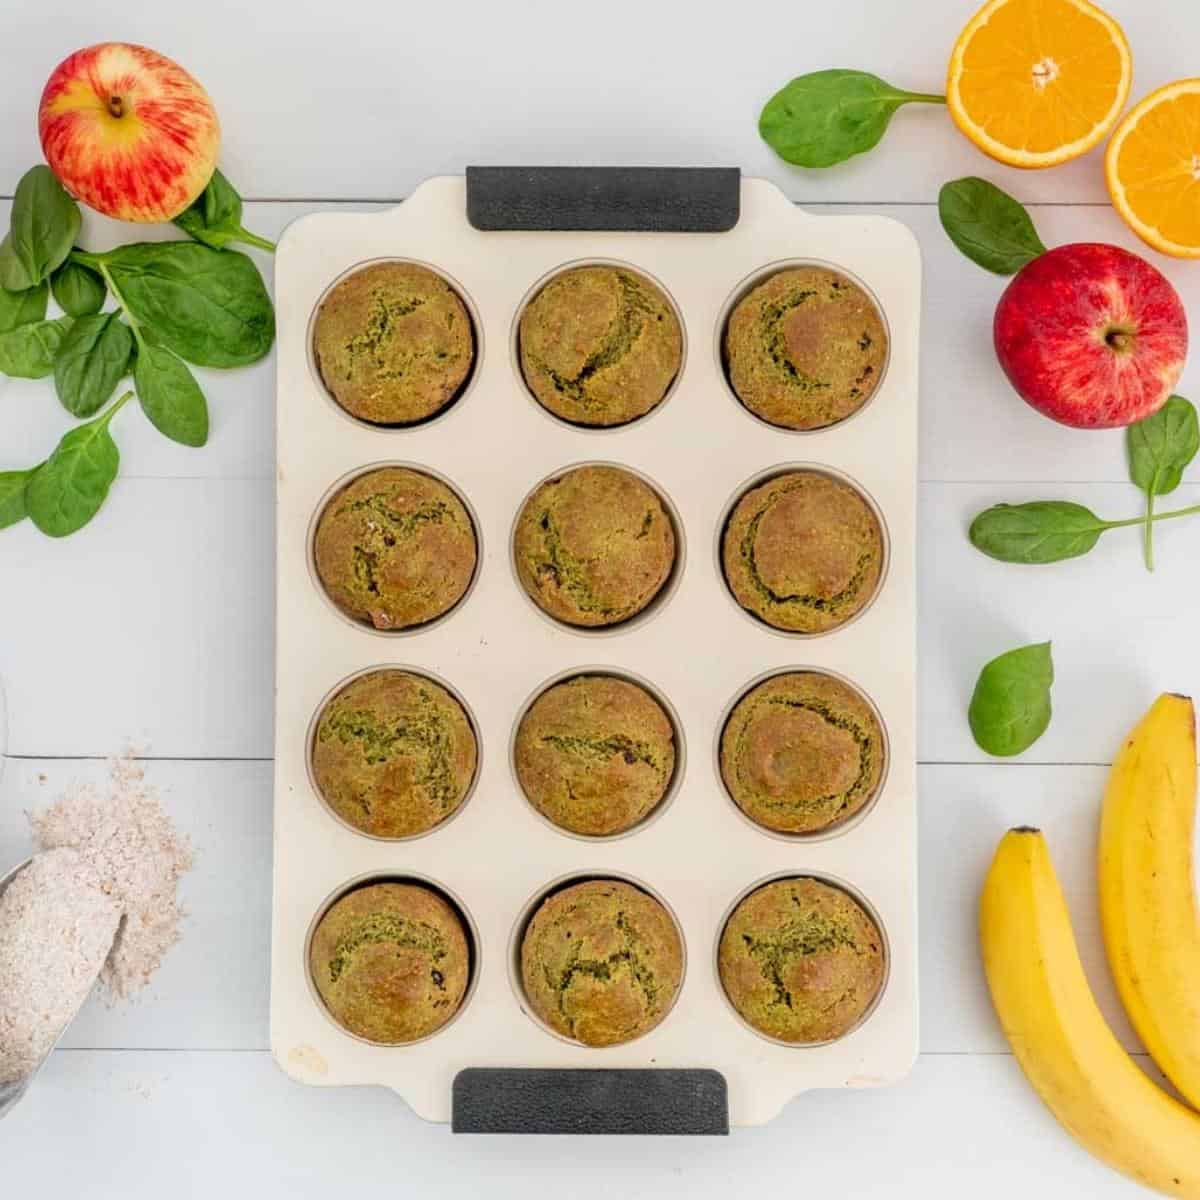 Baked spinach muffins in a cream muffin tray cooling on a bench top.